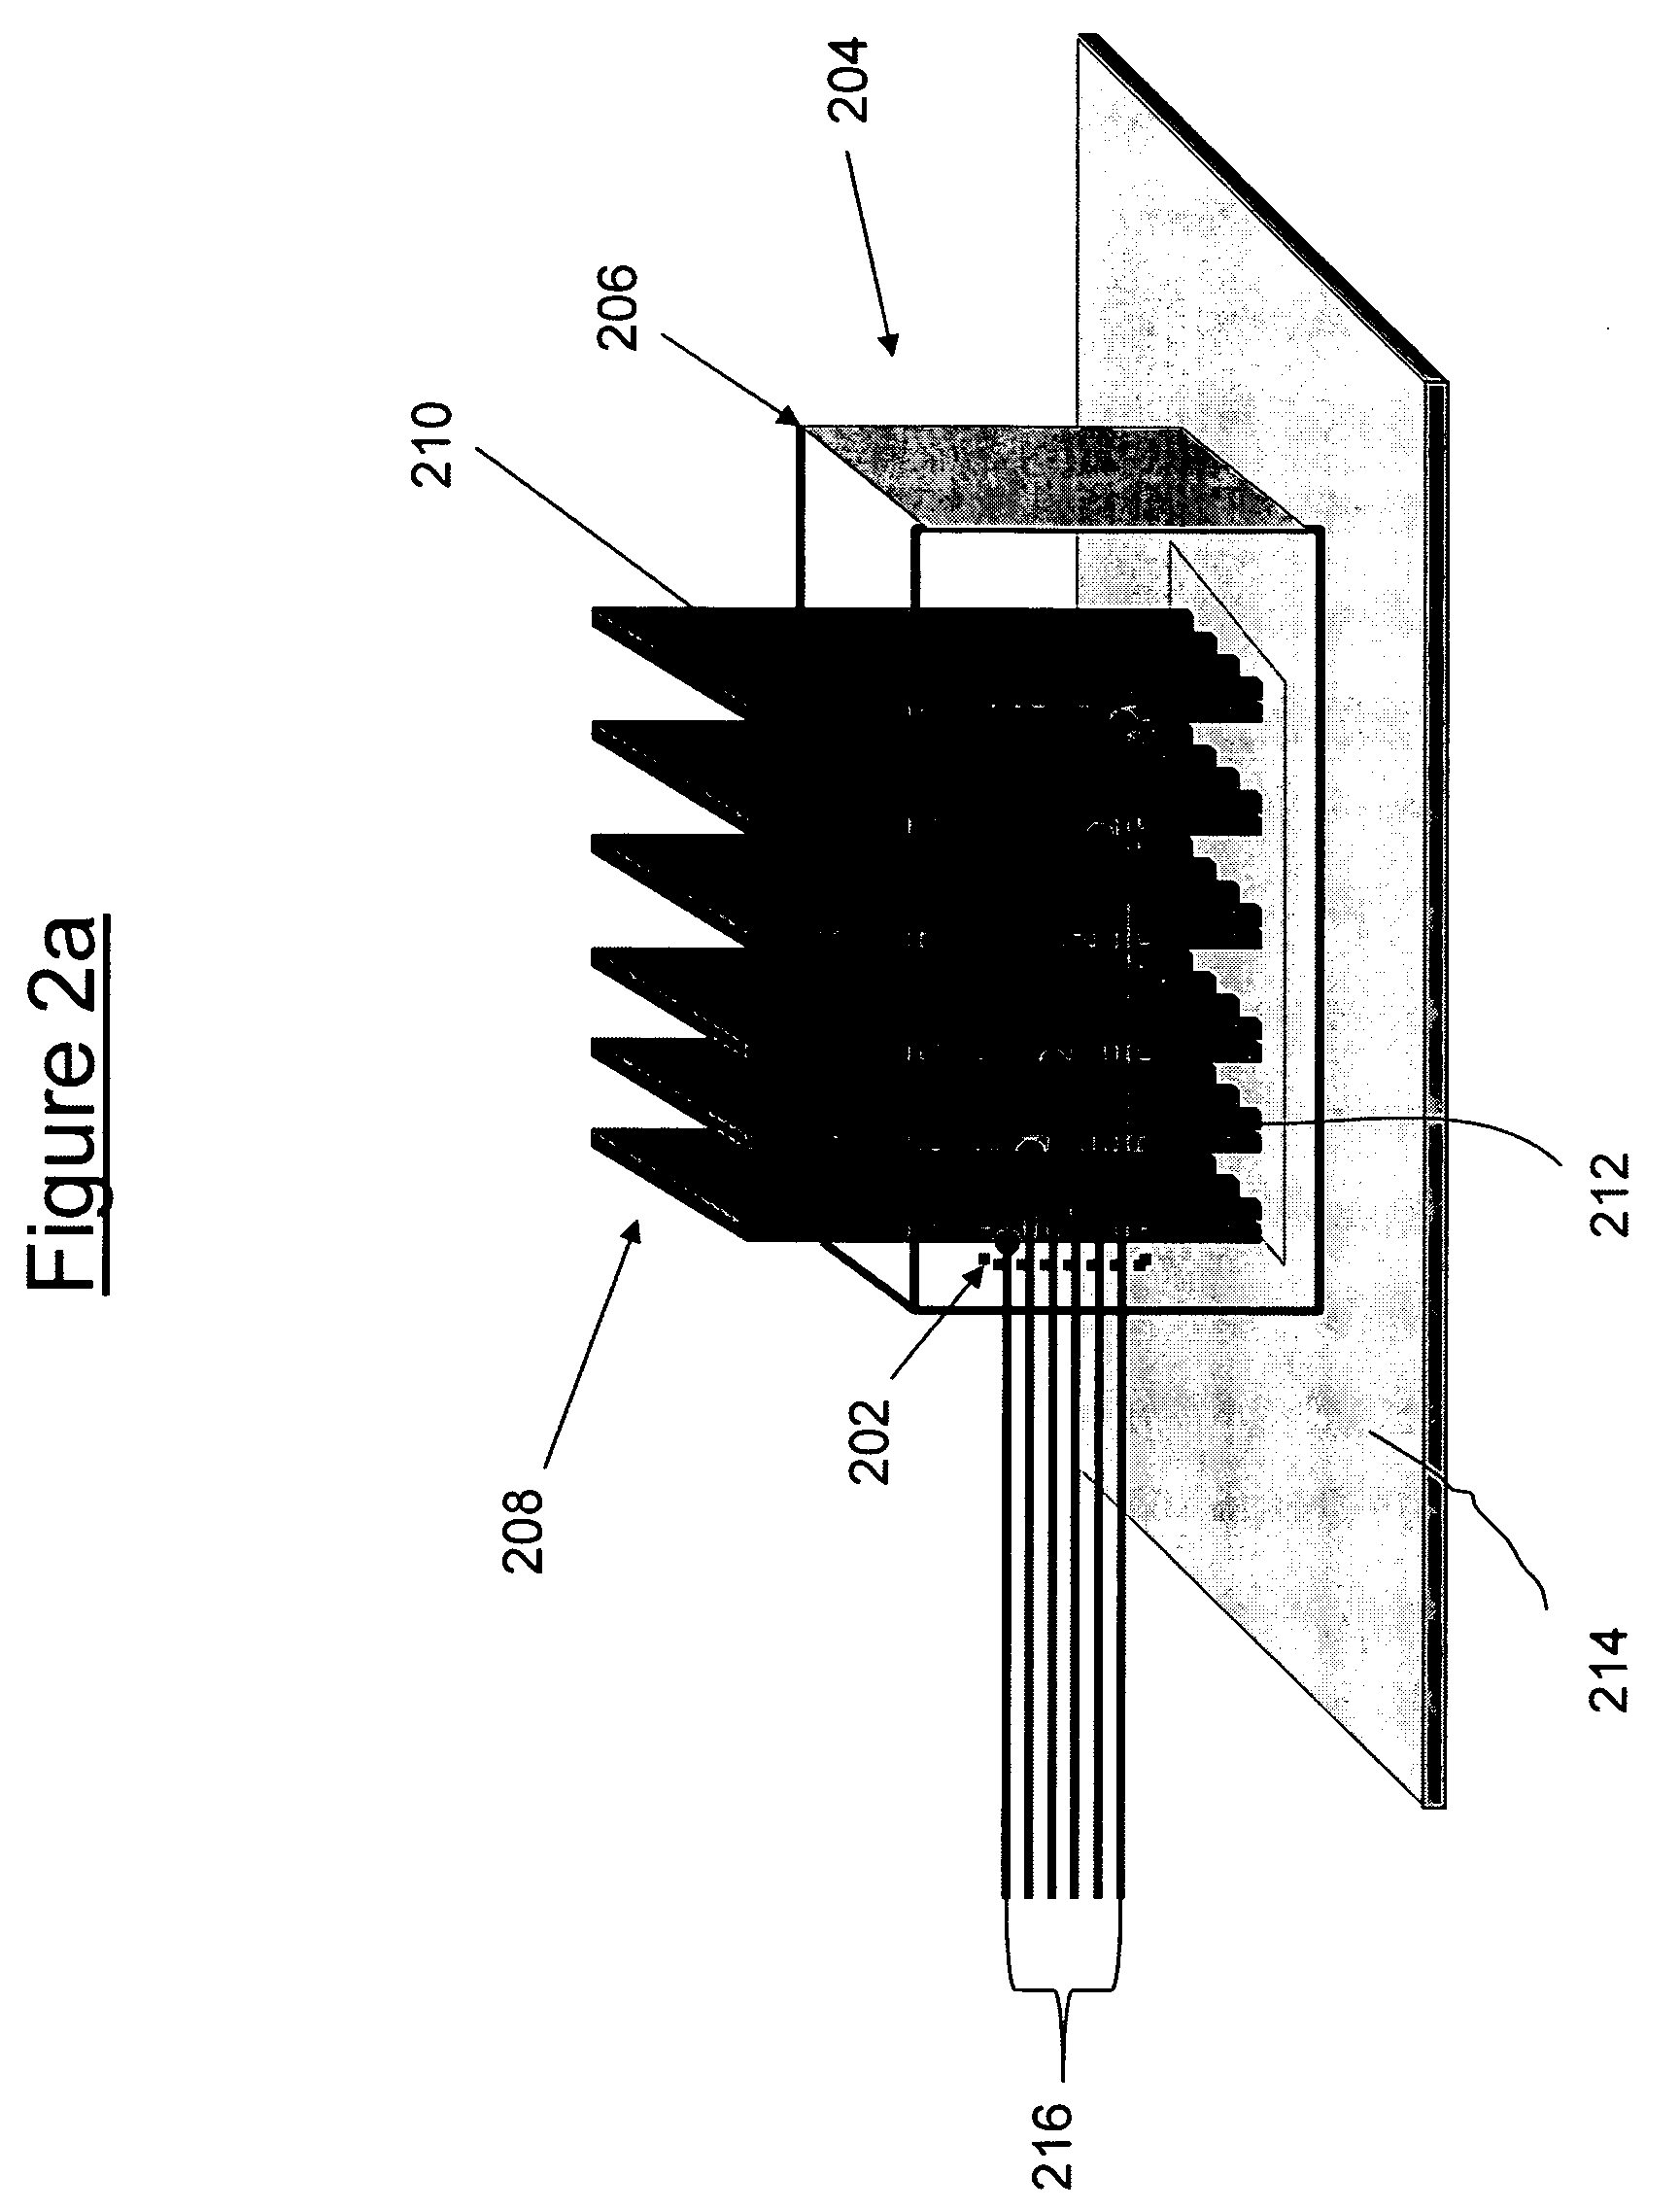 Connector with conductors exposed to exterior air to facilitate heat removal